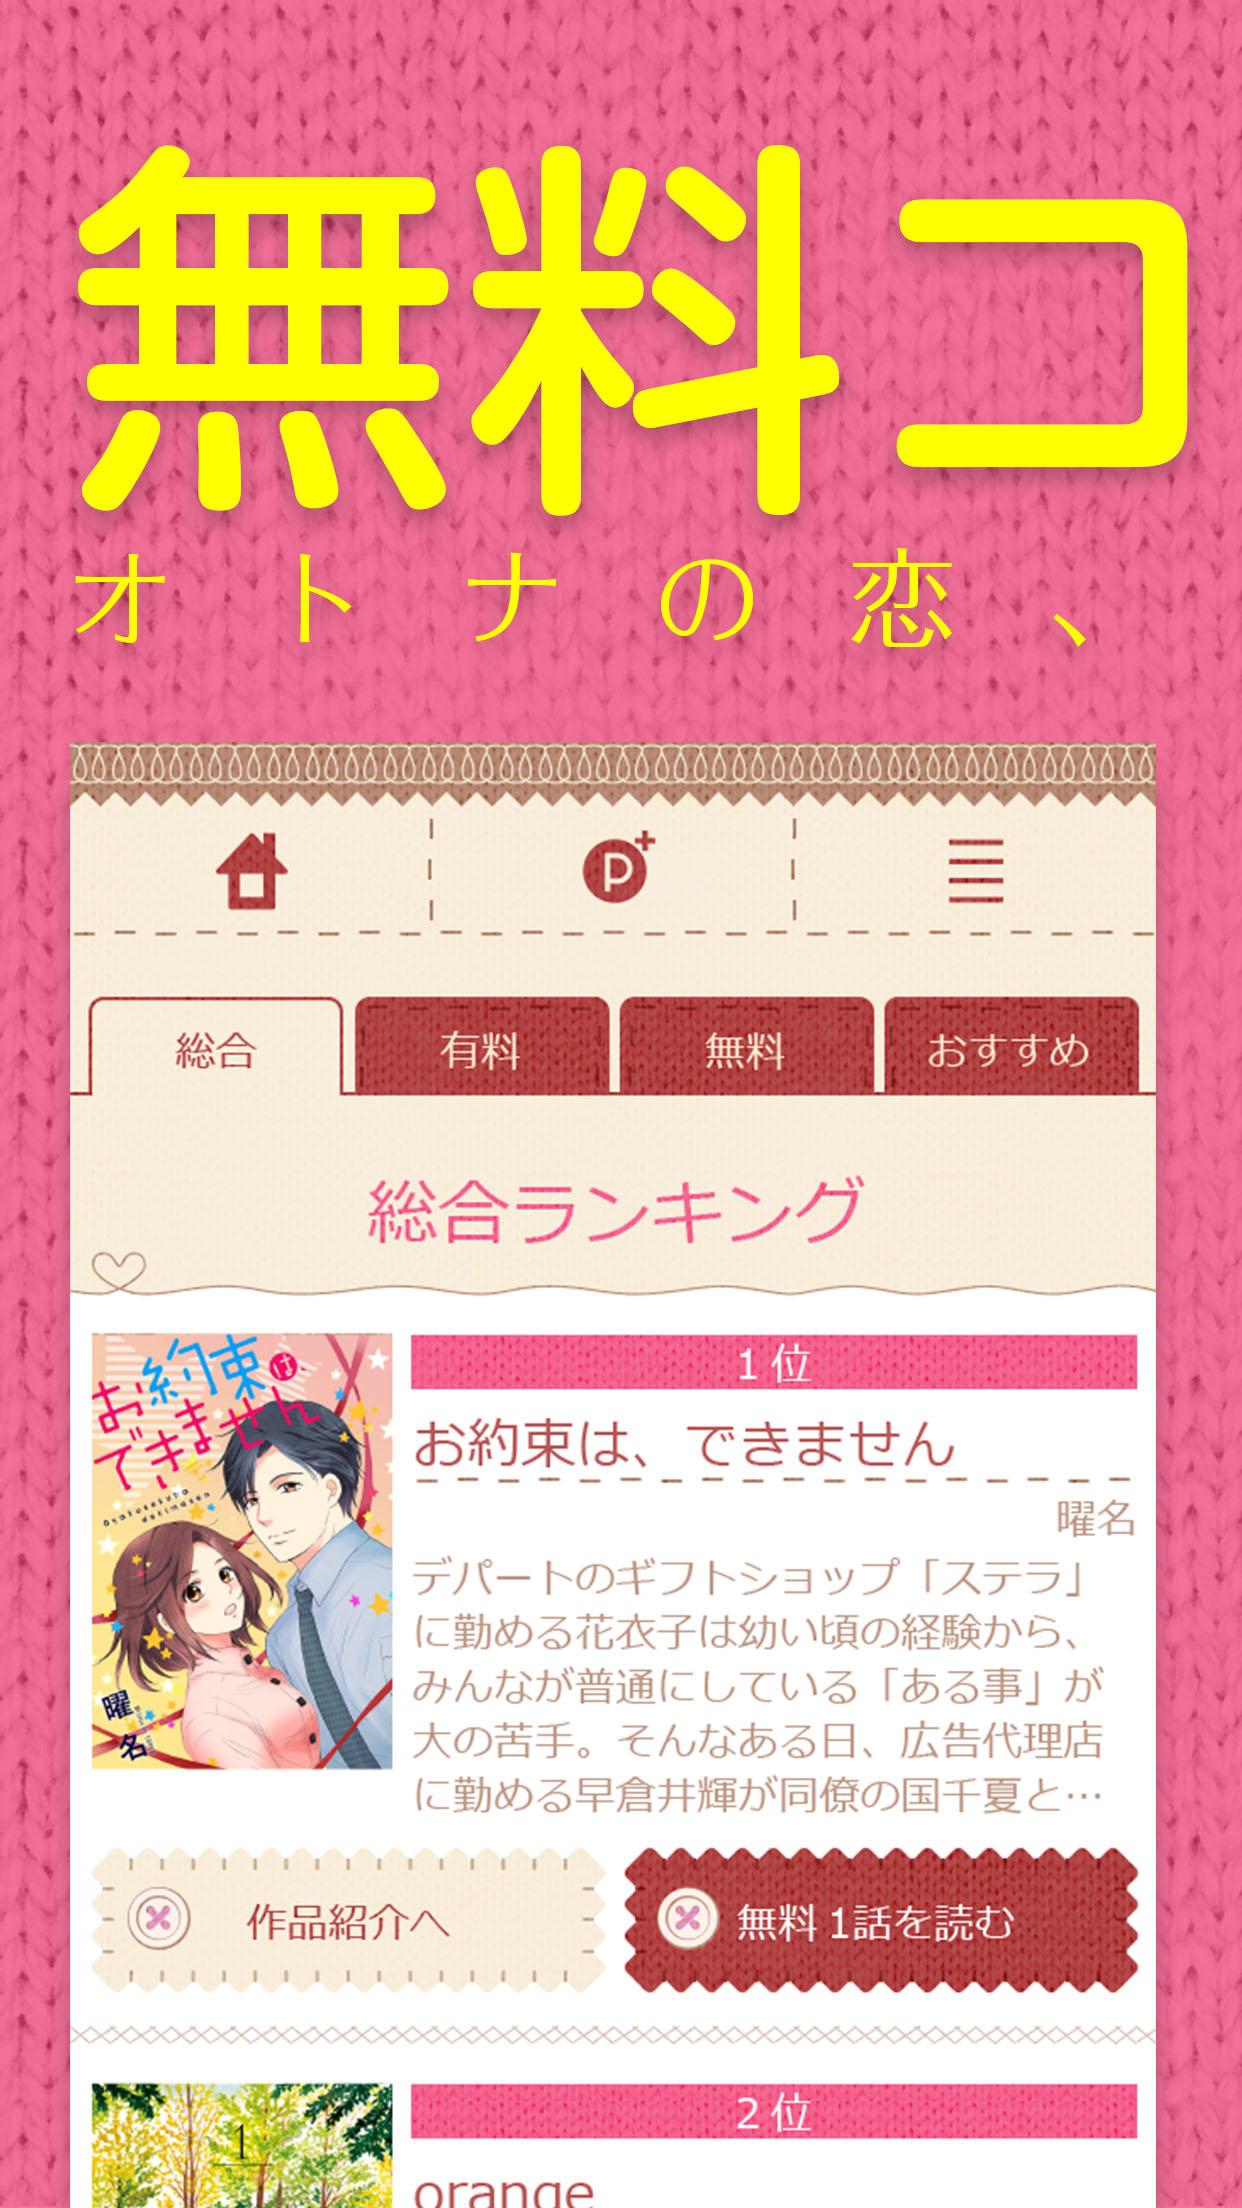 Android application 【無料まんが】女性向け恋愛マンガ読み放題！andコミック screenshort